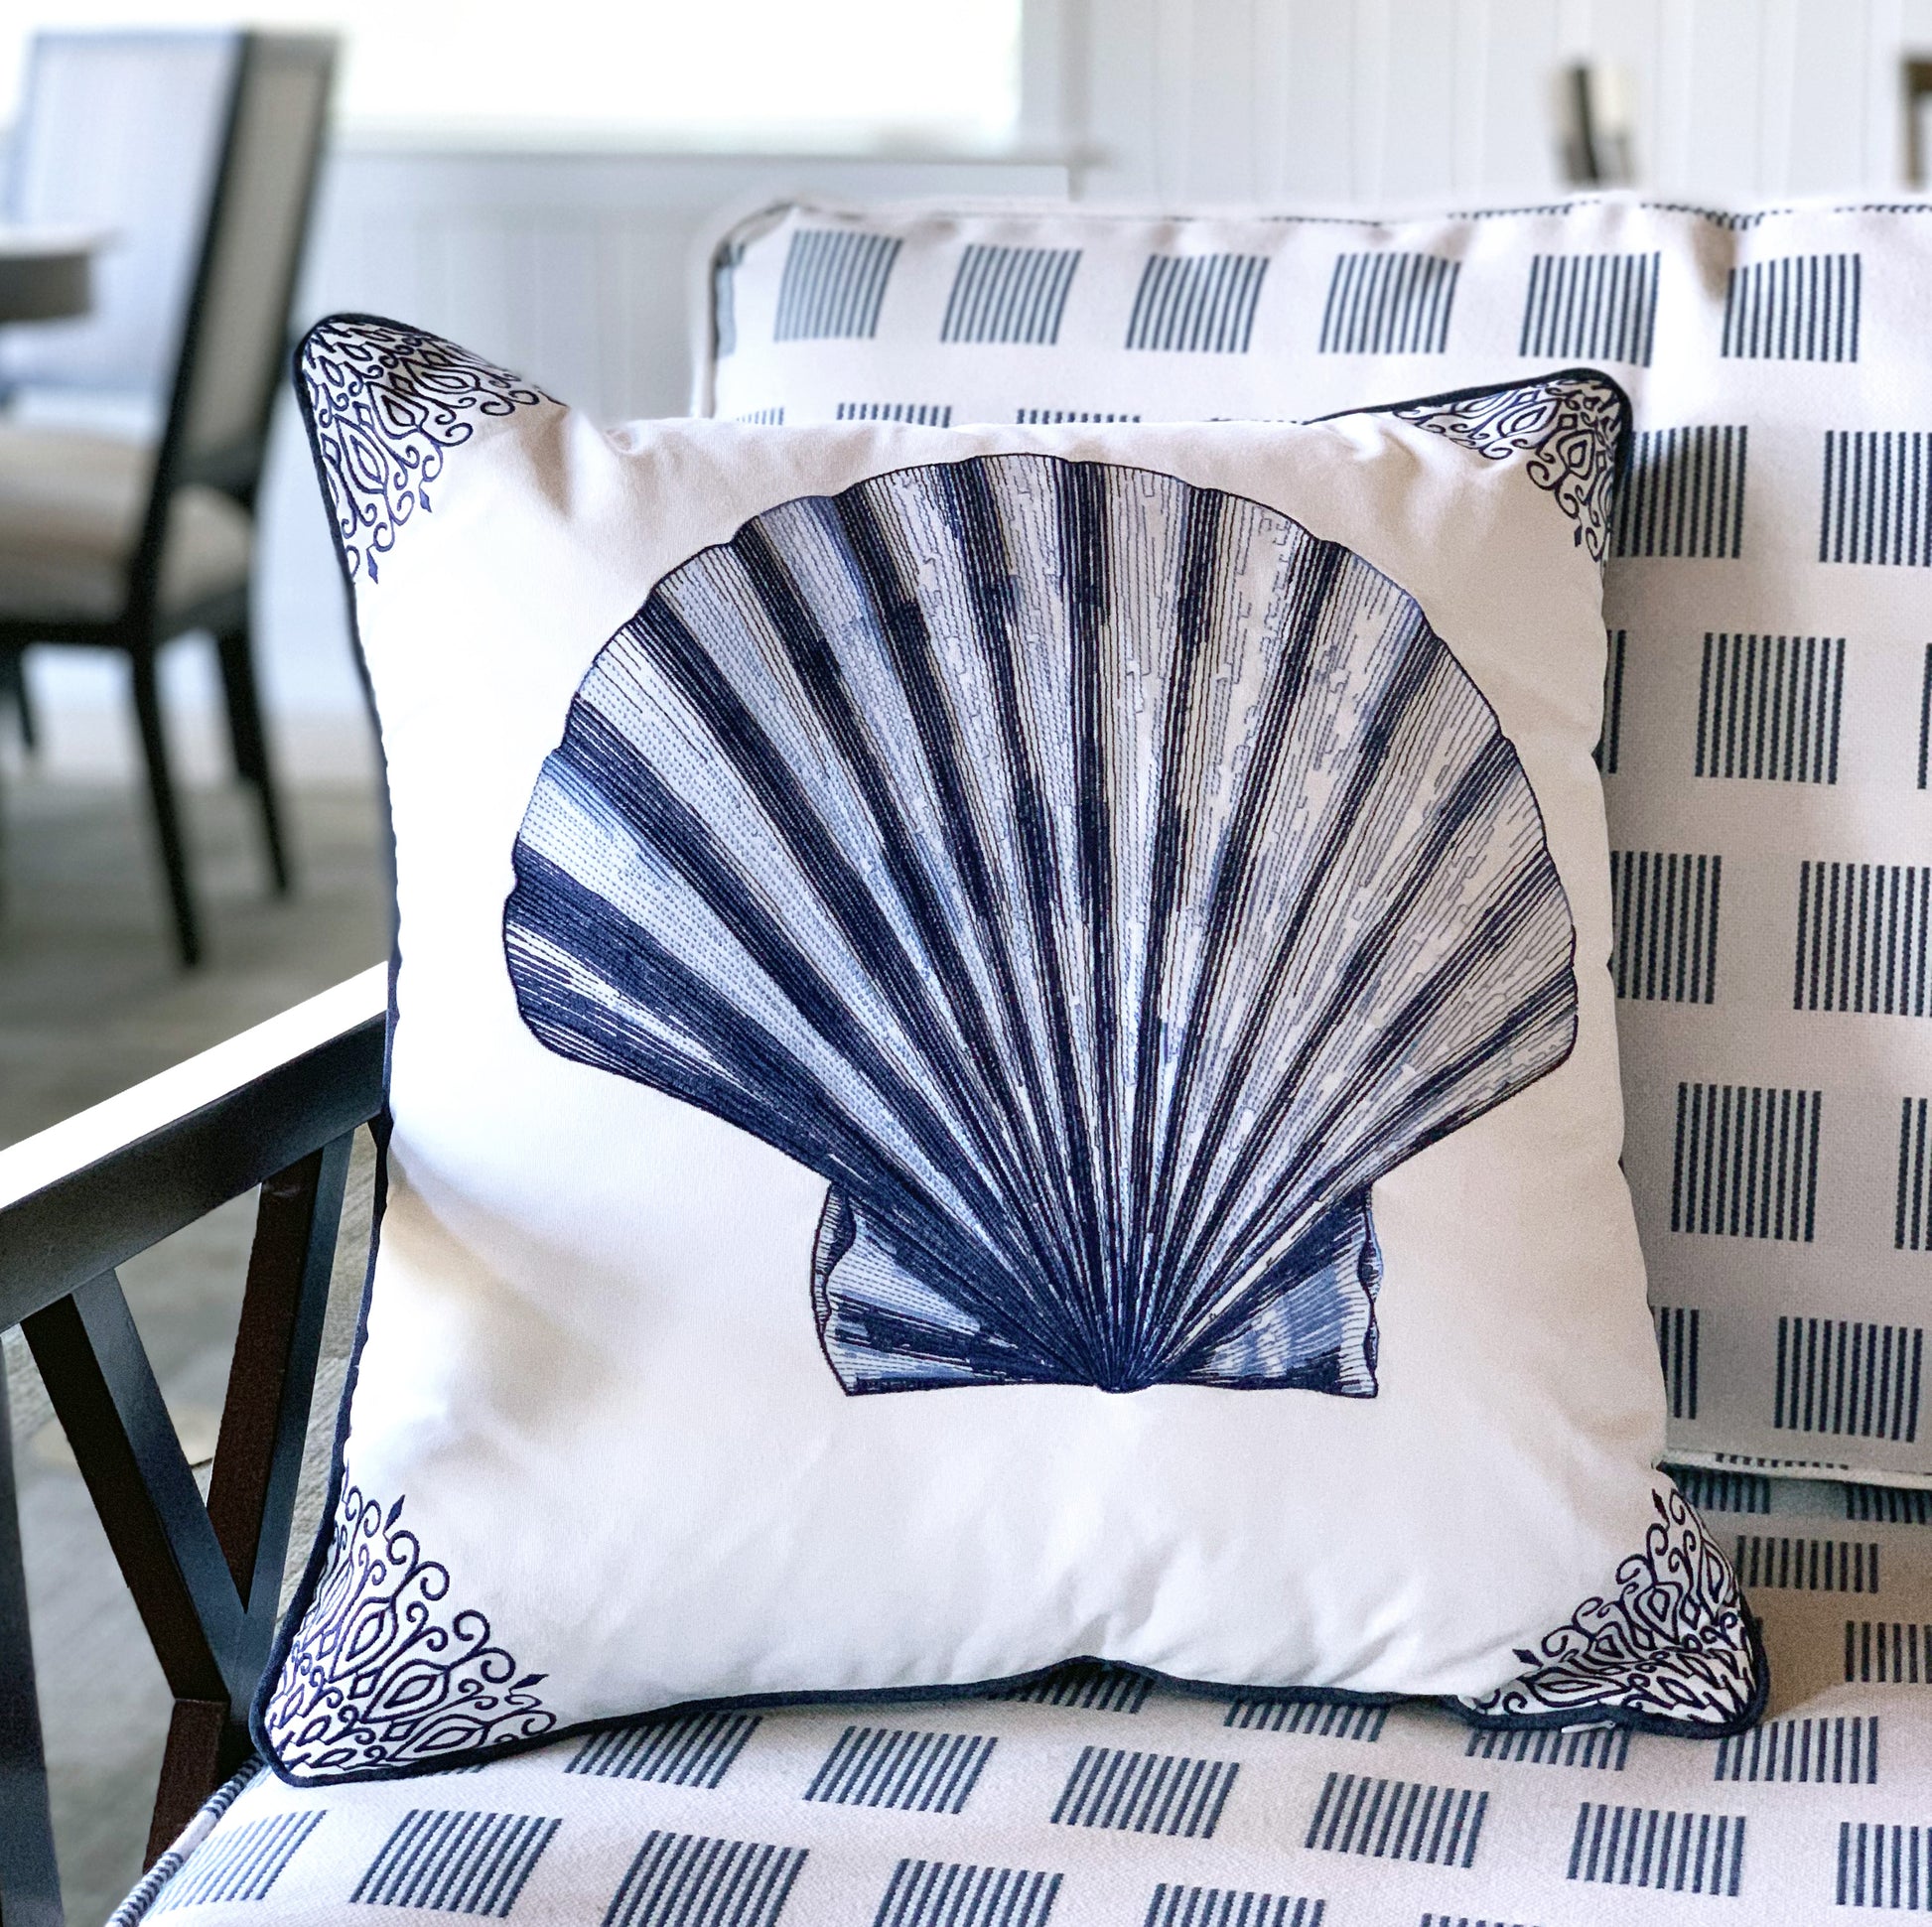 Indigo Scallop Shell pillow styled on a patio chair.